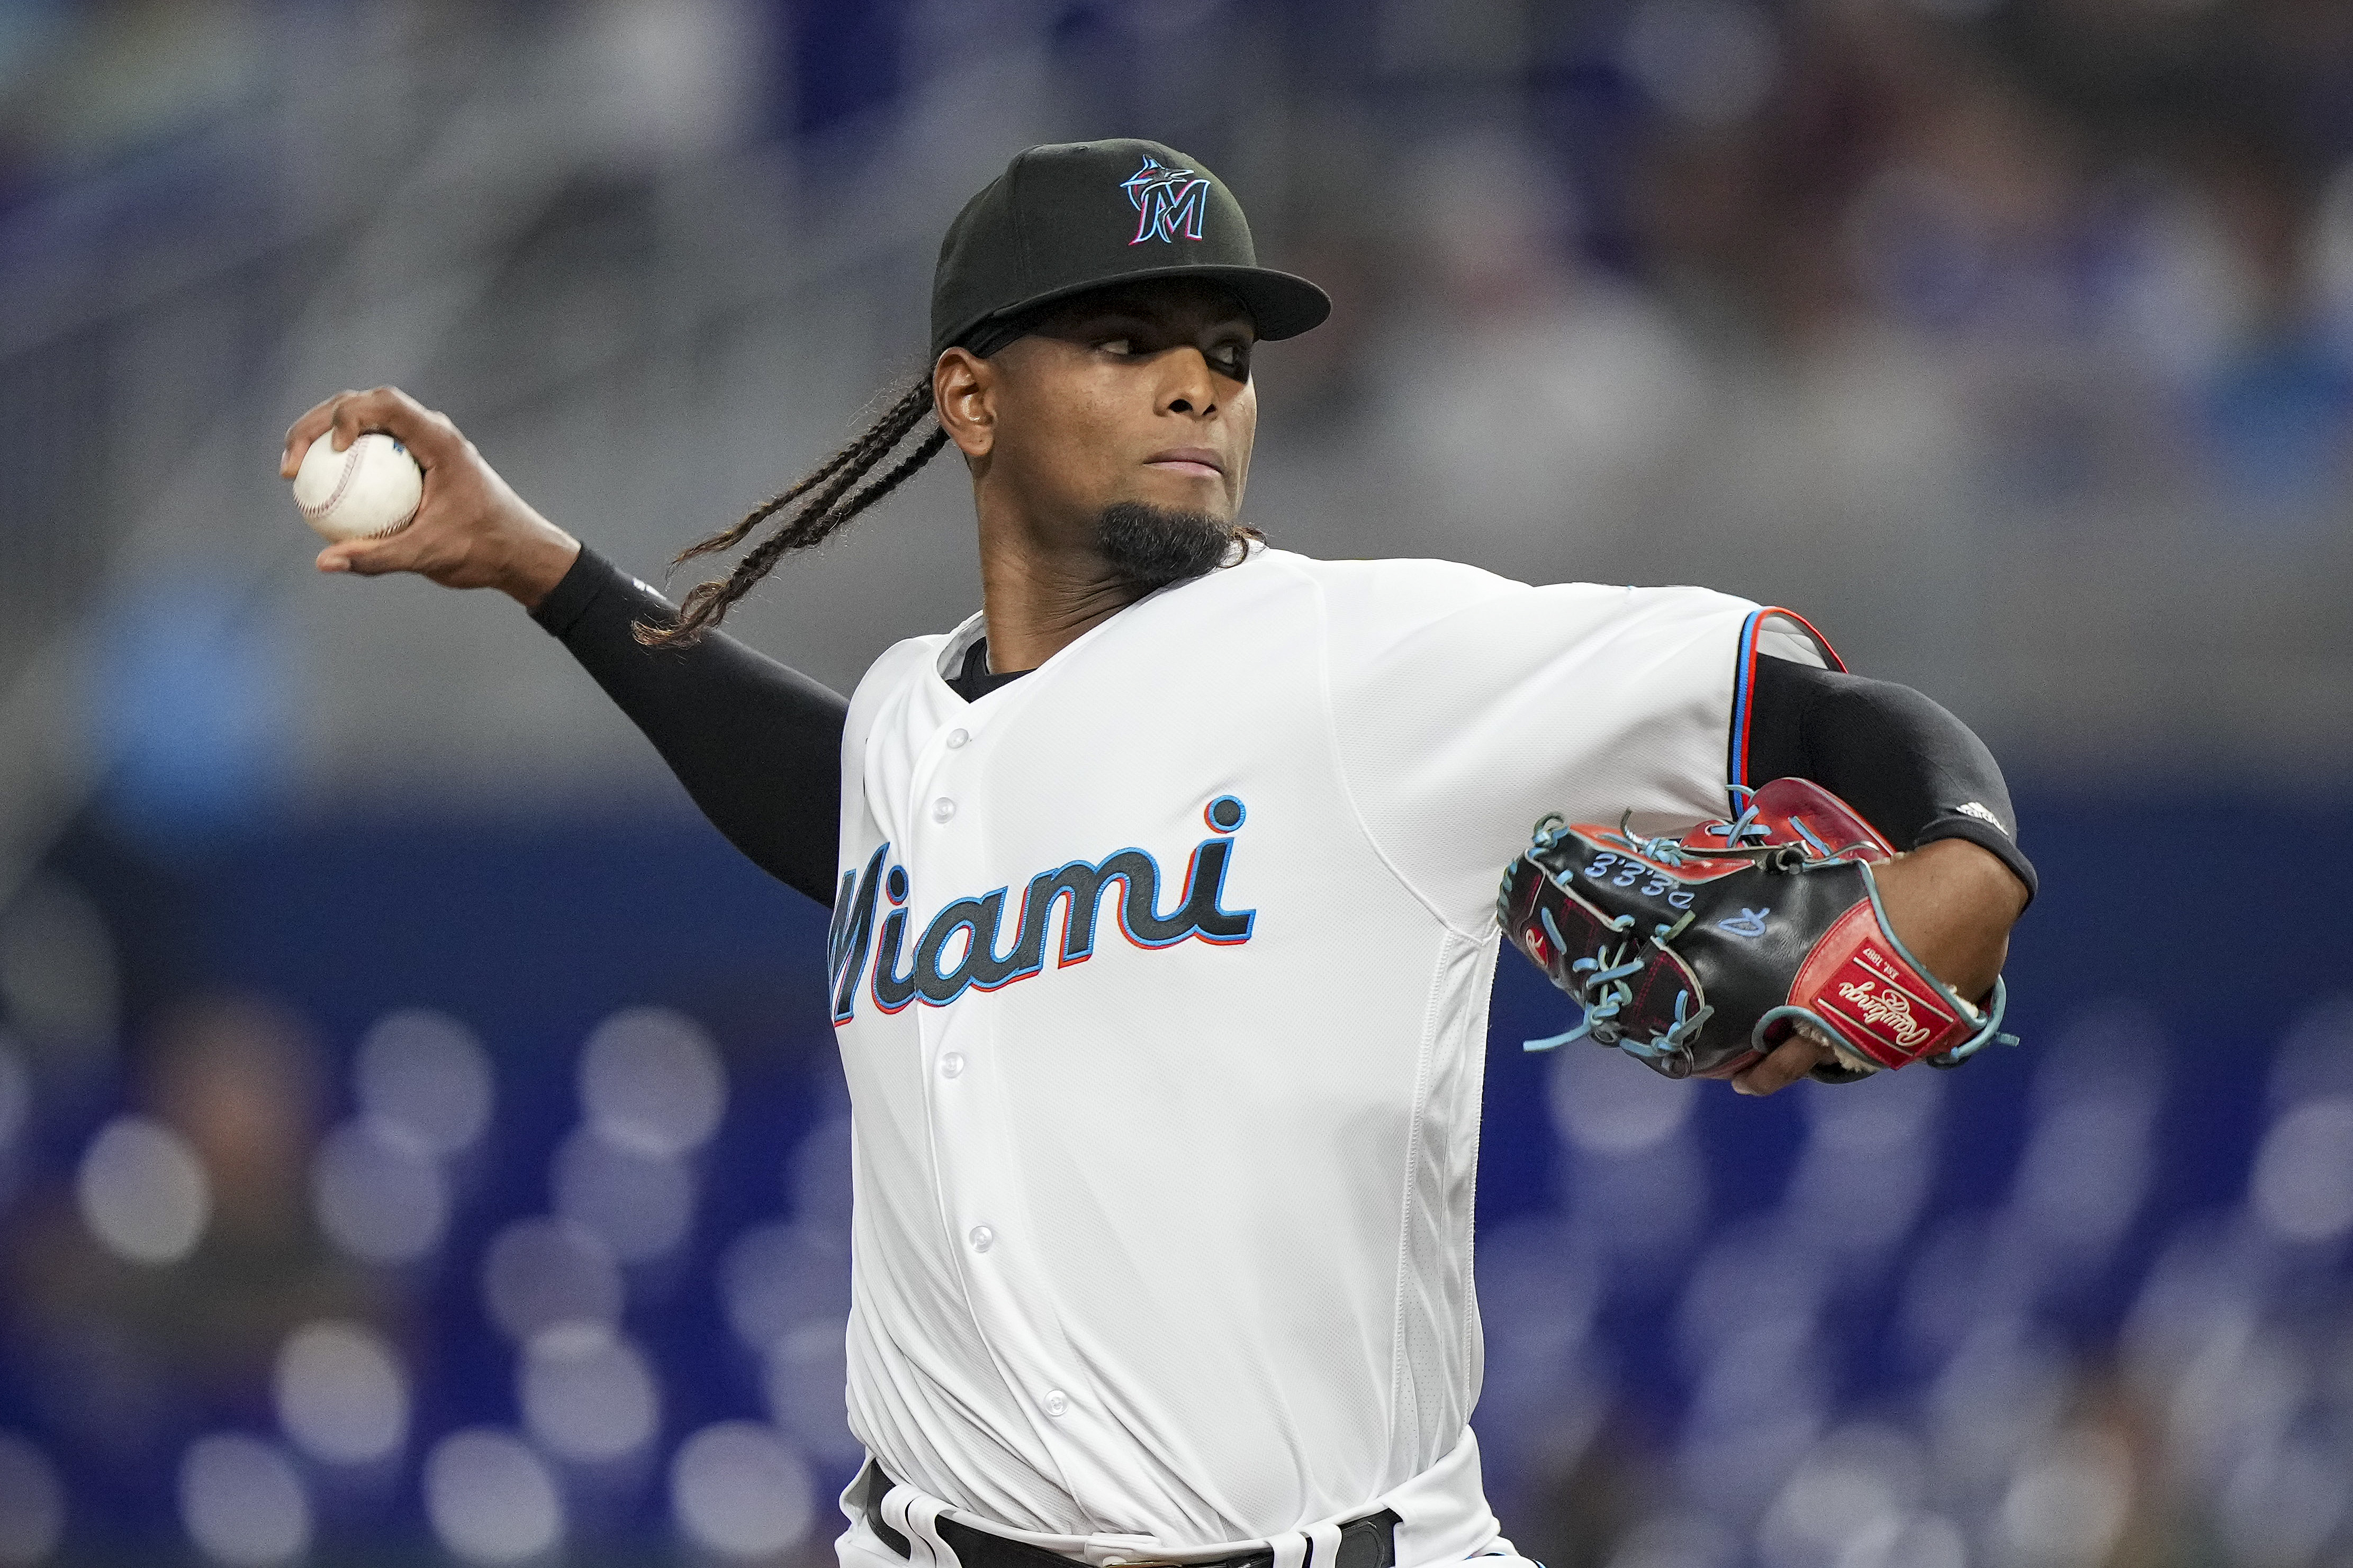 Two Impressive Debuts Fuel the Marlins - The New York Times